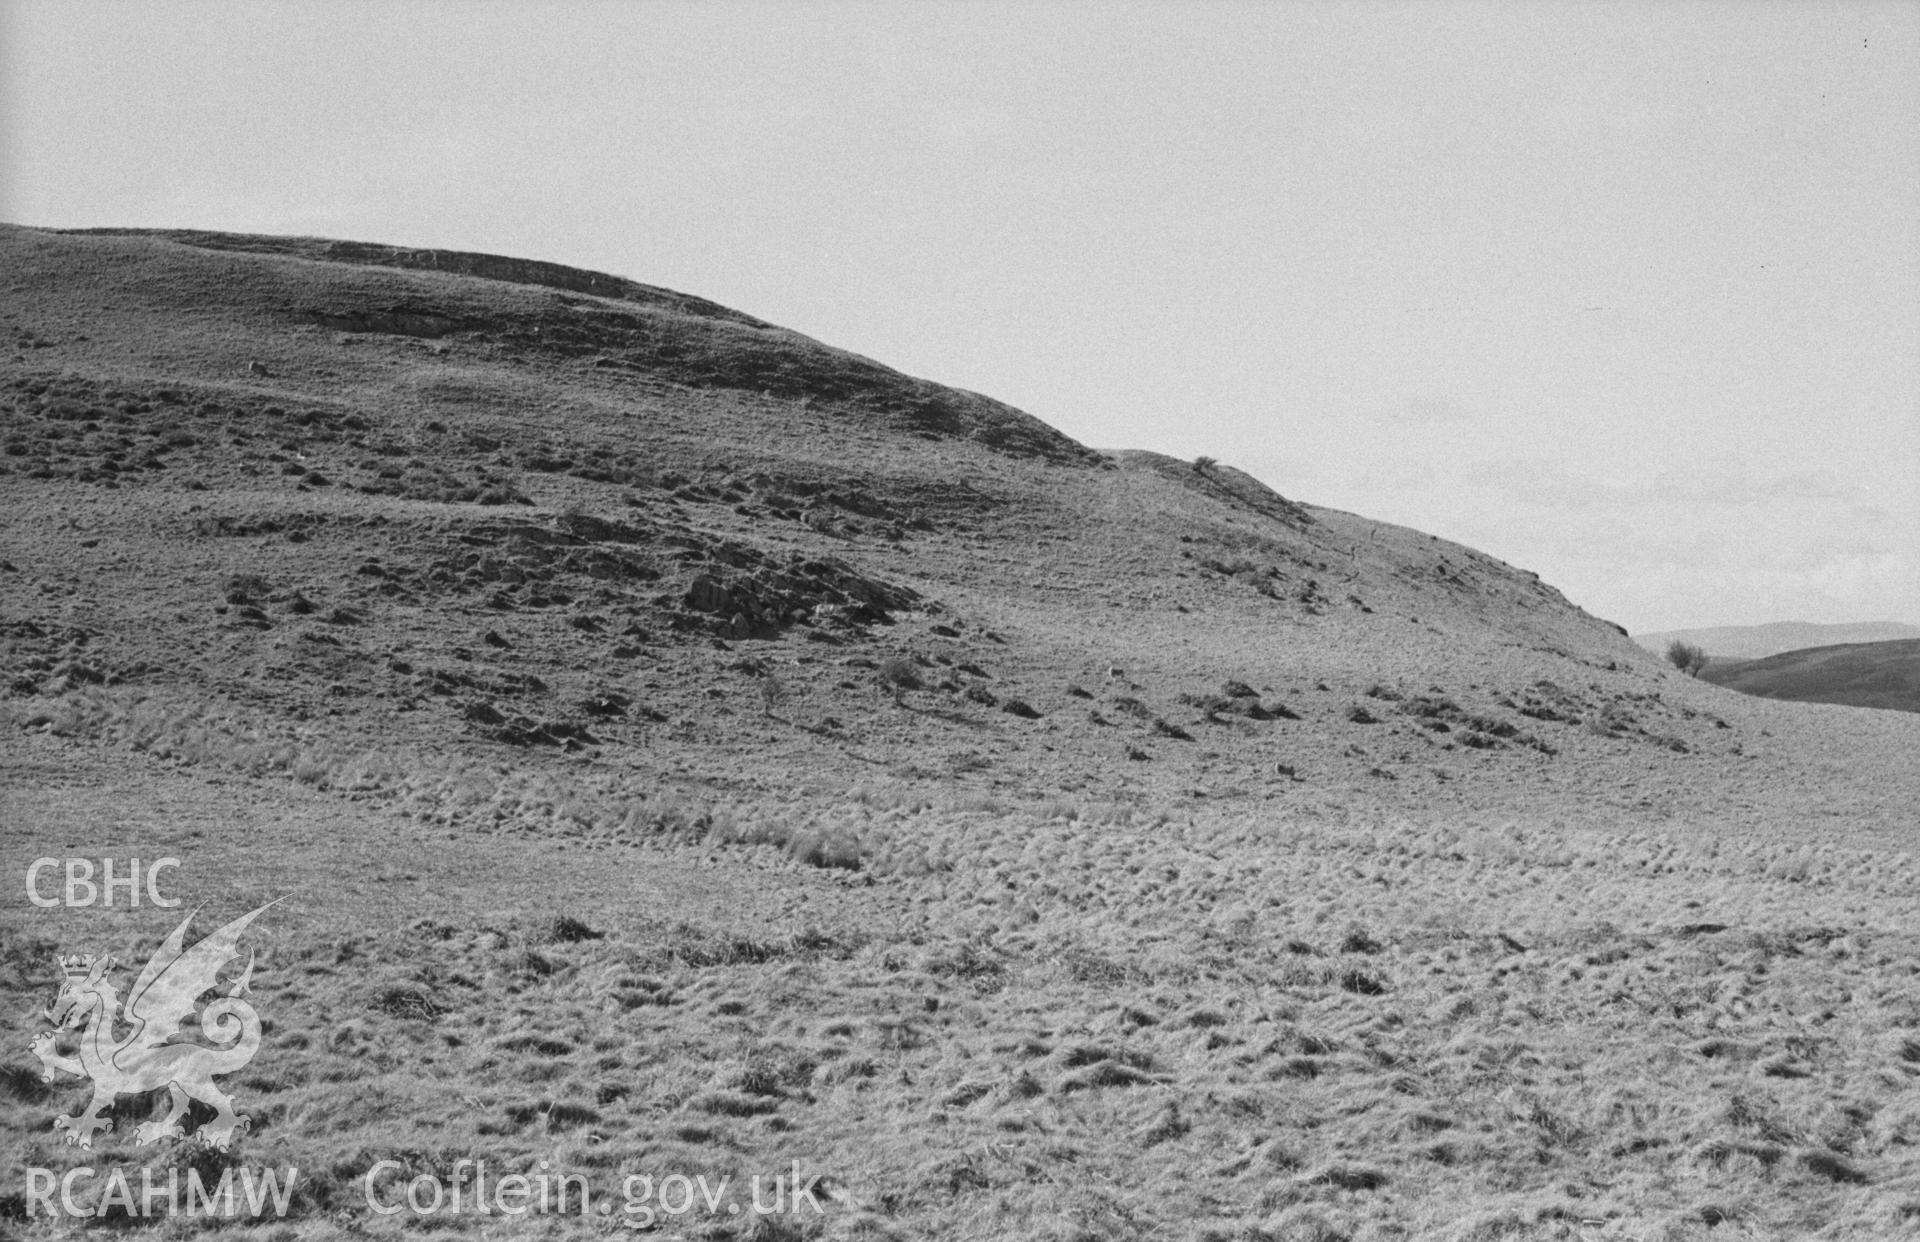 Digital copy of a black and white negative showing view of Pen Dinas, Elerch. Entrance through ramparts on the left. Photographed in April 1963 by Arthur O. Chater from Grid Reference SN 6788 8758, looking west north west.